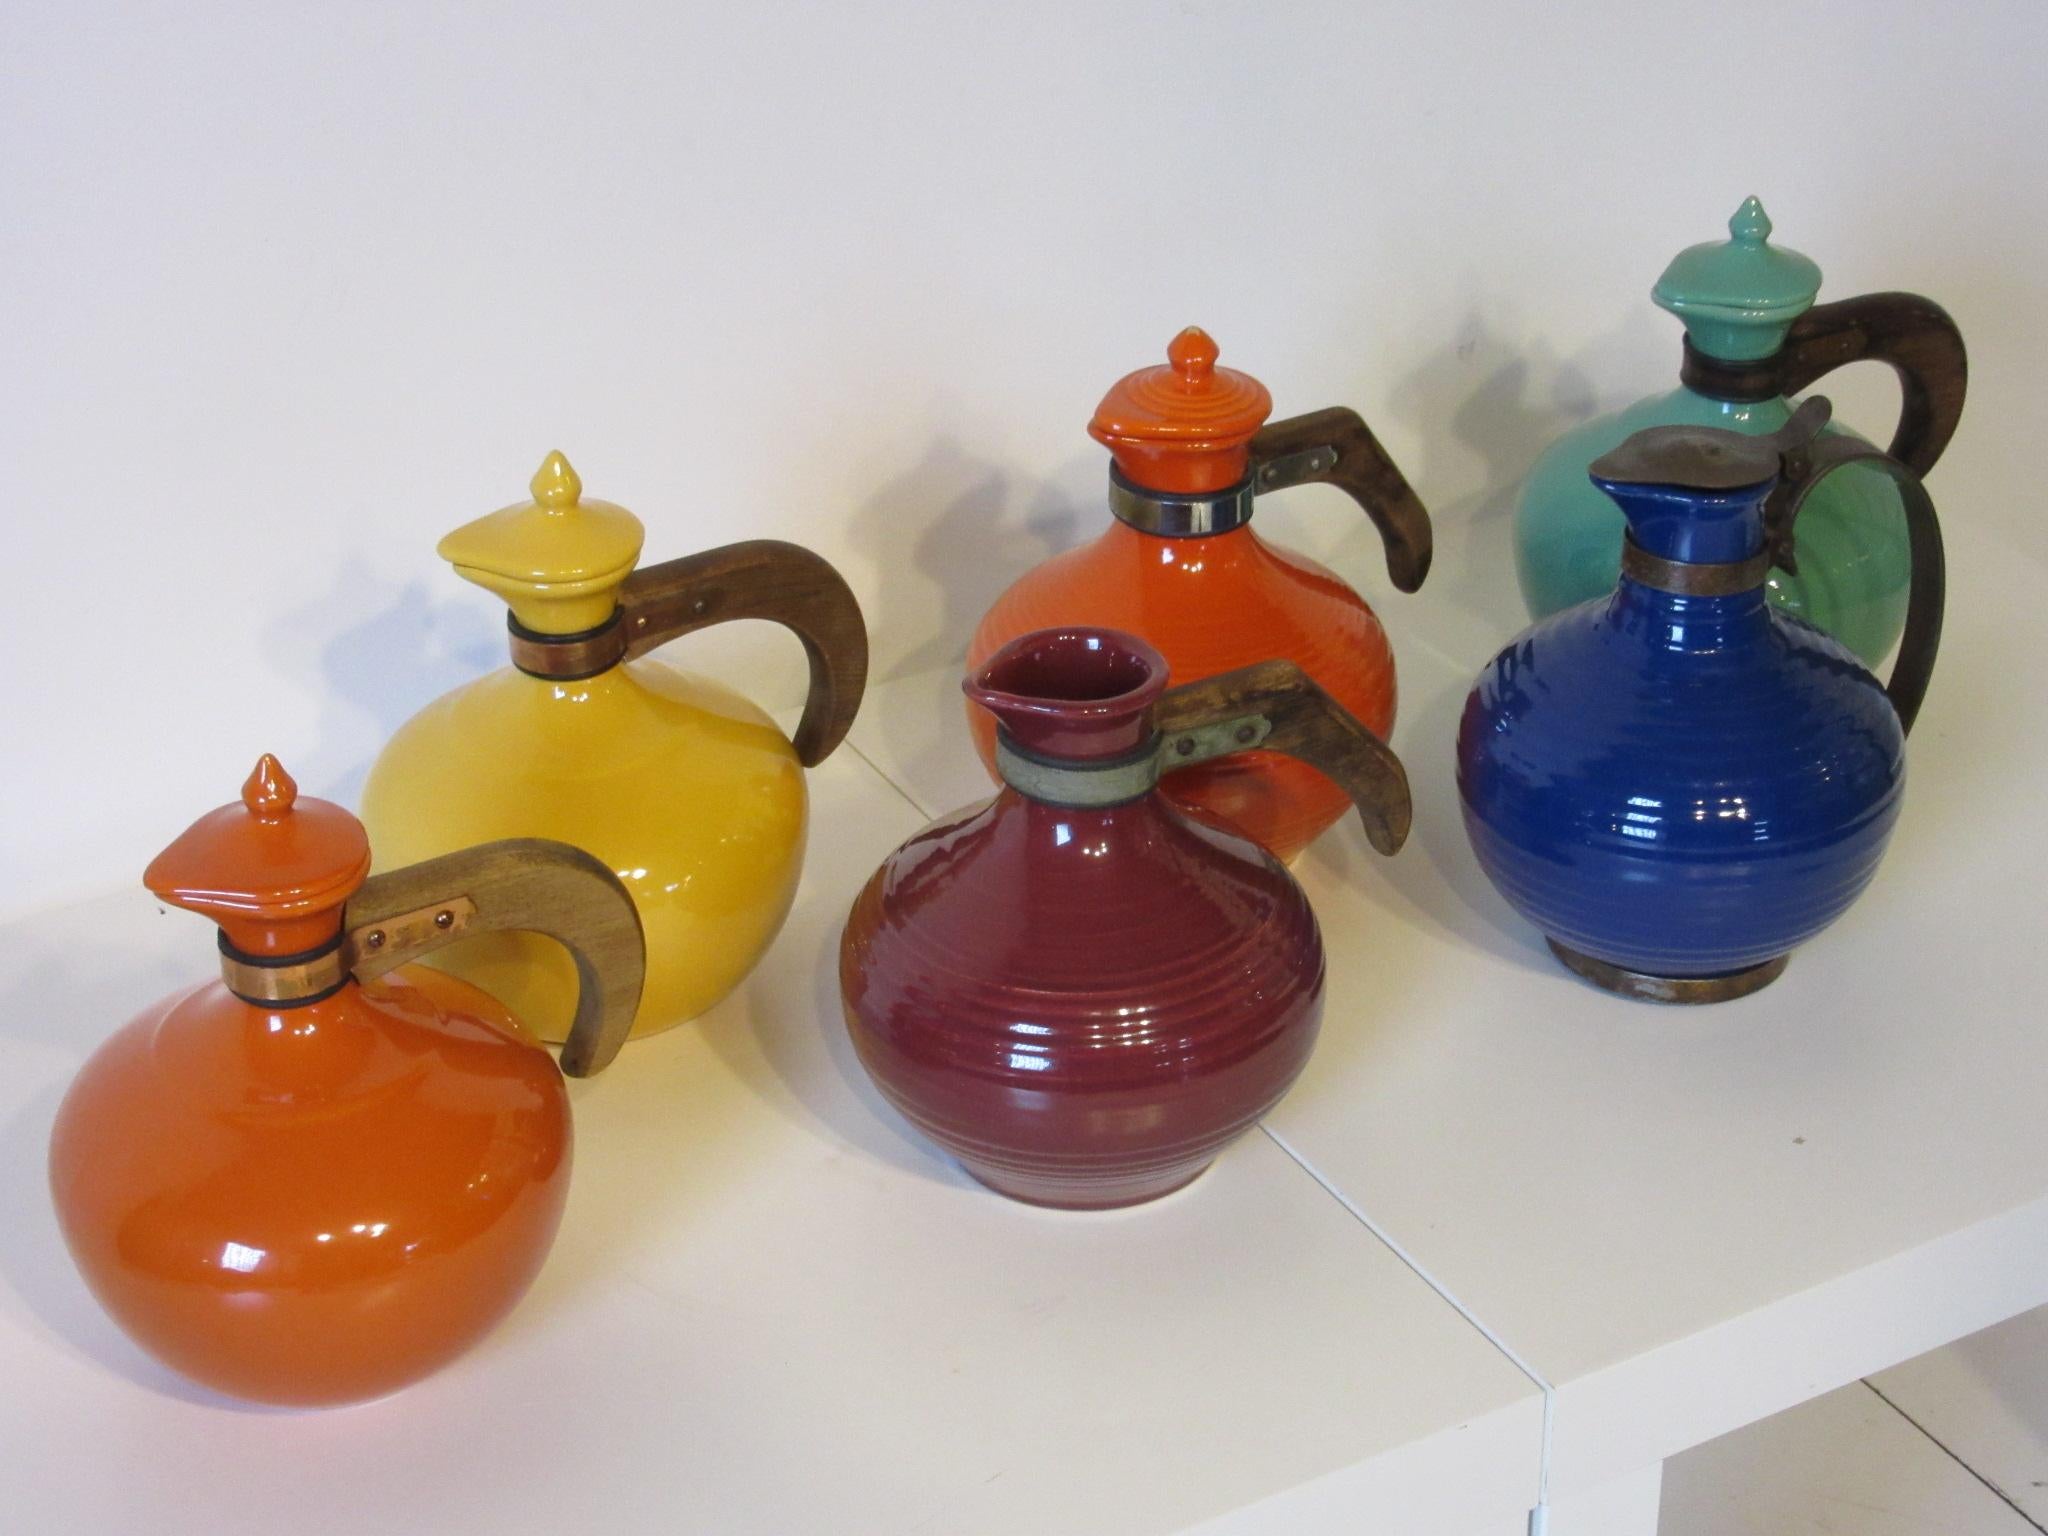 A collection of six coffee pots or carafes by the Bauer pottery company from the Ring Line, noted for their well constructed and wonderful shapes the first to introduce the colorful style which is typically attributed to Fiesta . Great for a touch